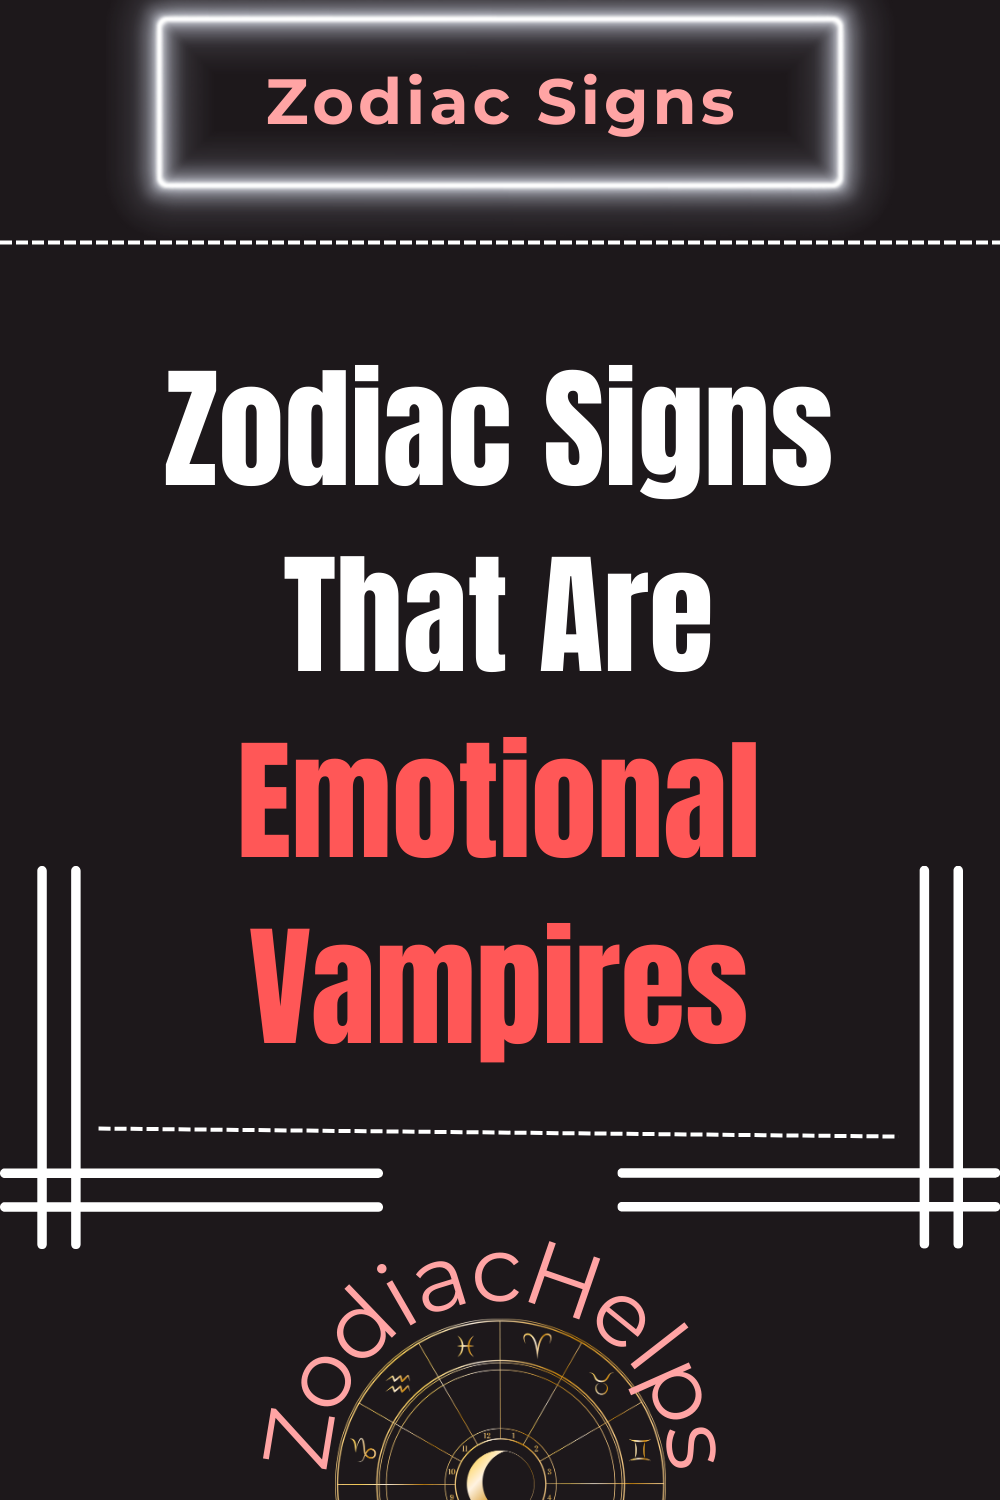 Zodiac Signs That Are Emotional Vampires